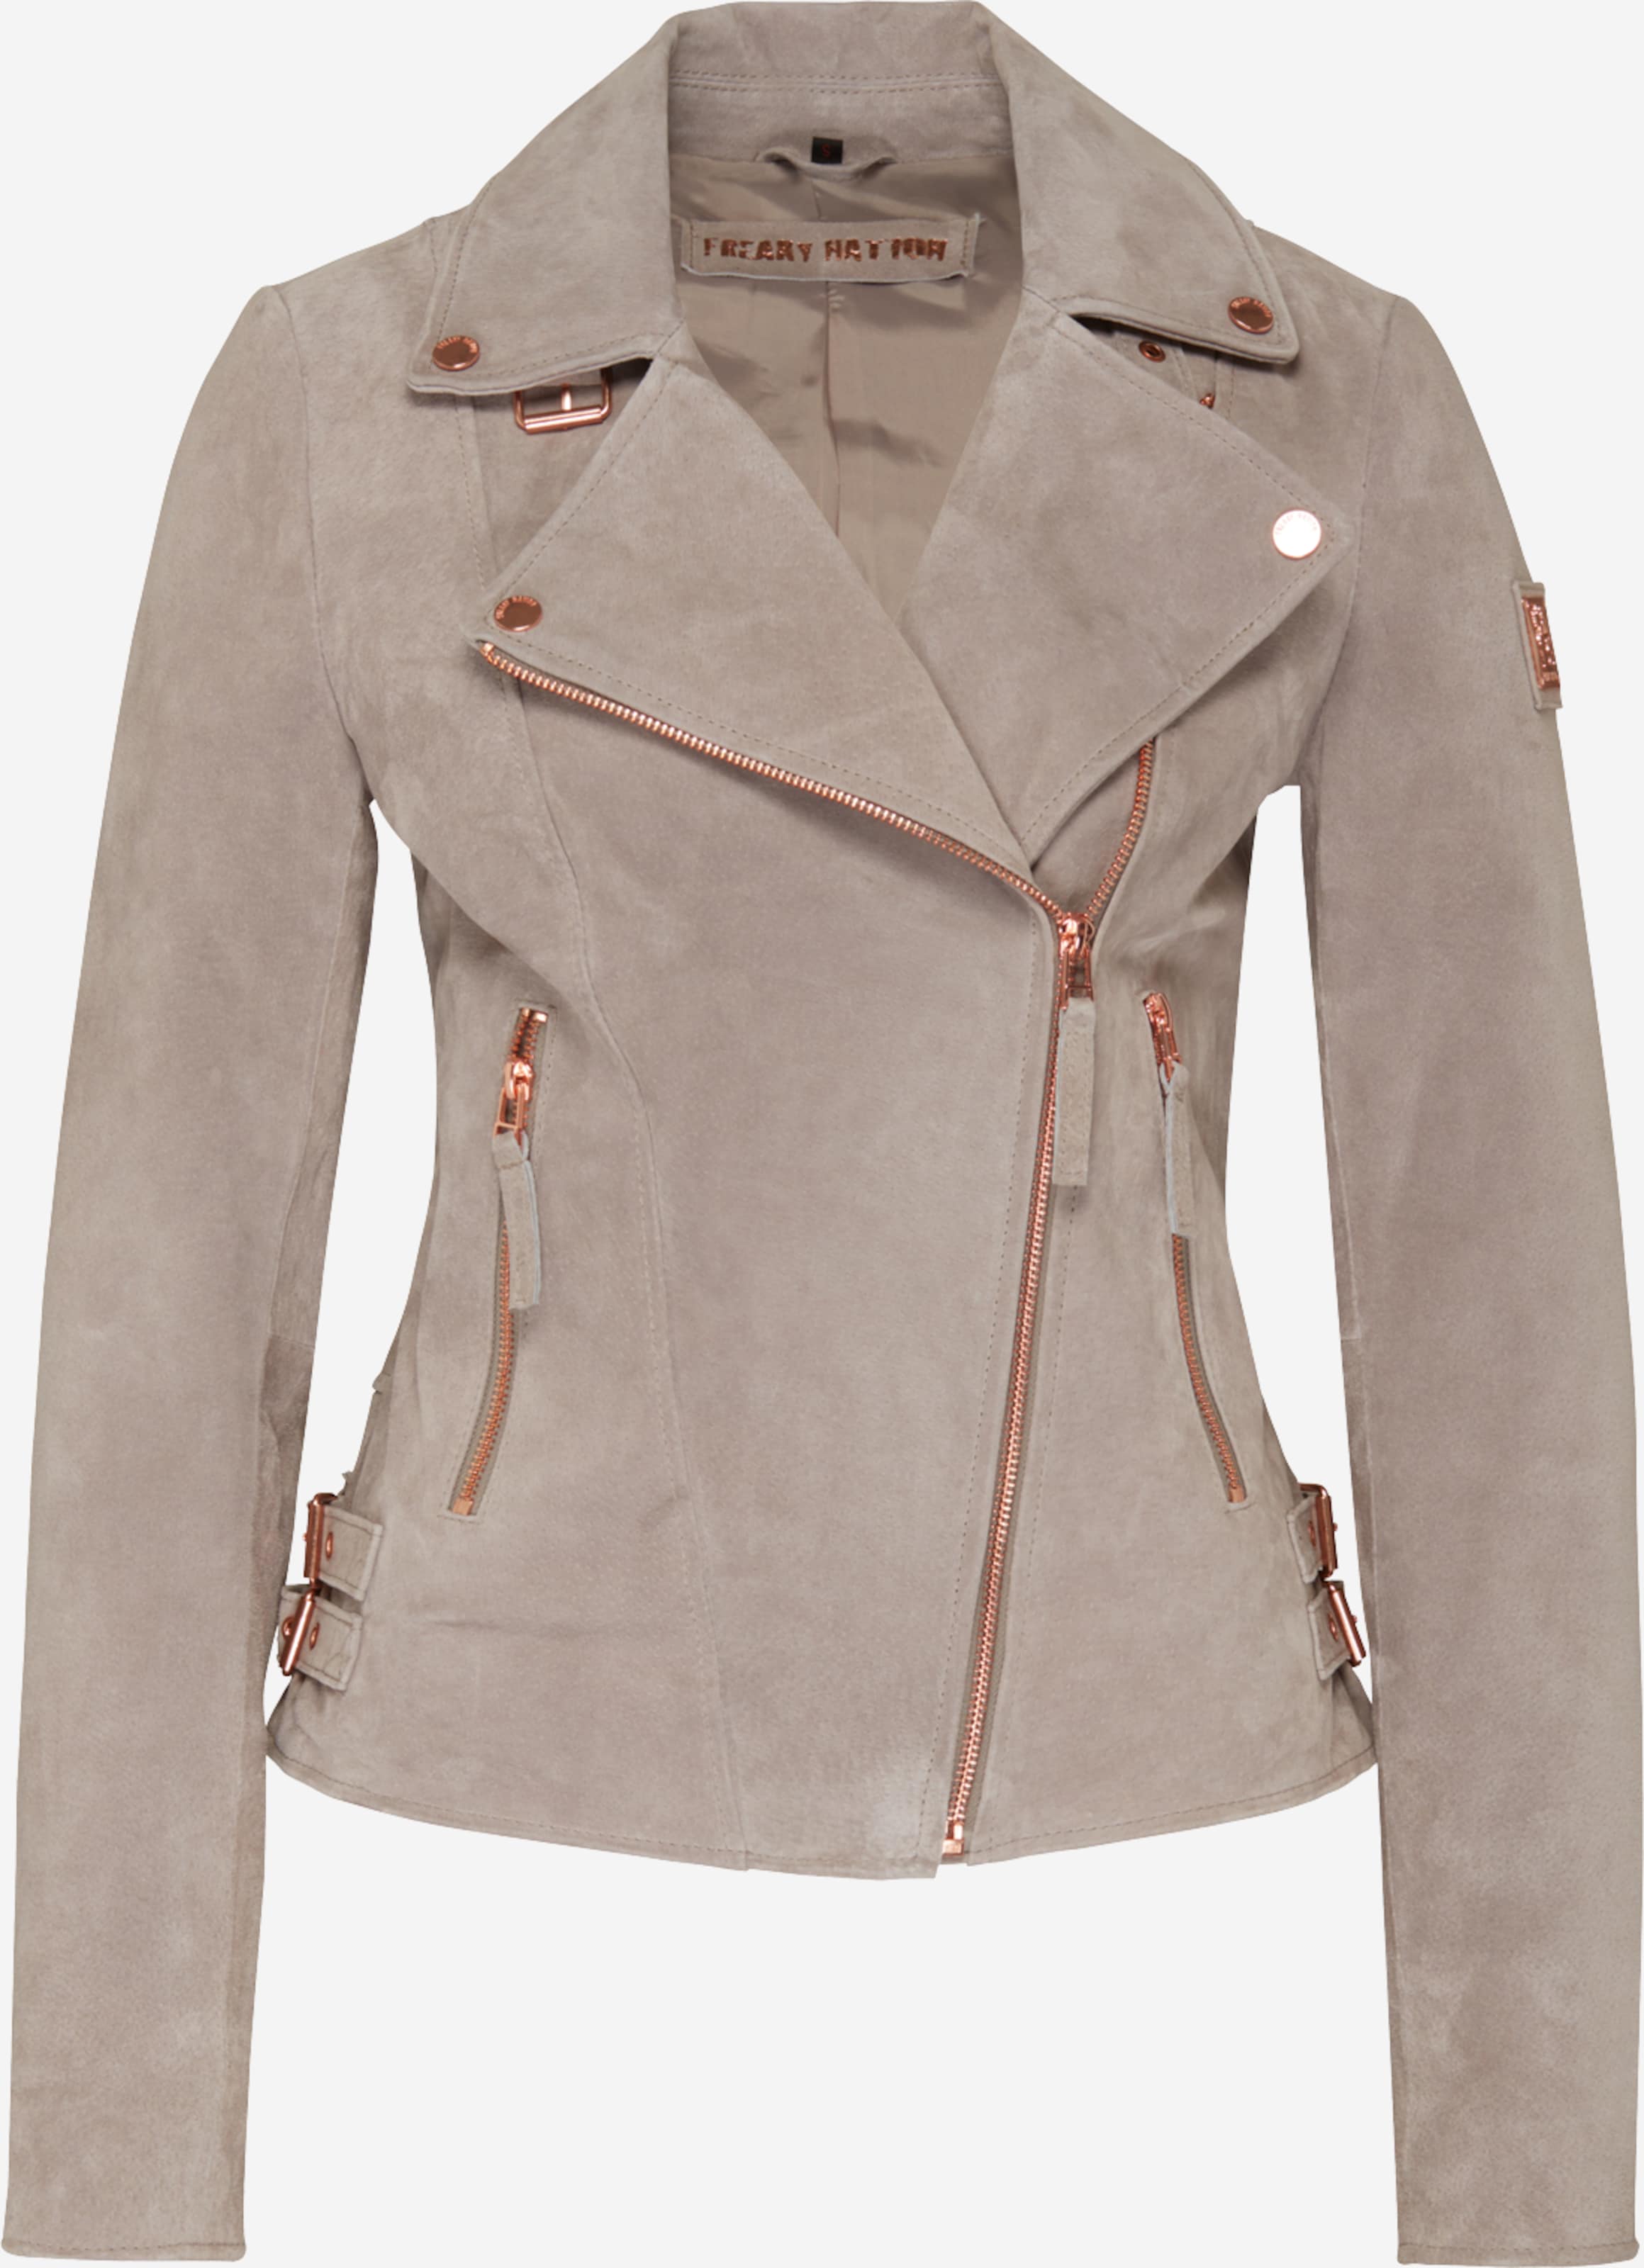 FREAKY NATION Between-Season Jacket 'Taxi Driver' in Beige | ABOUT YOU